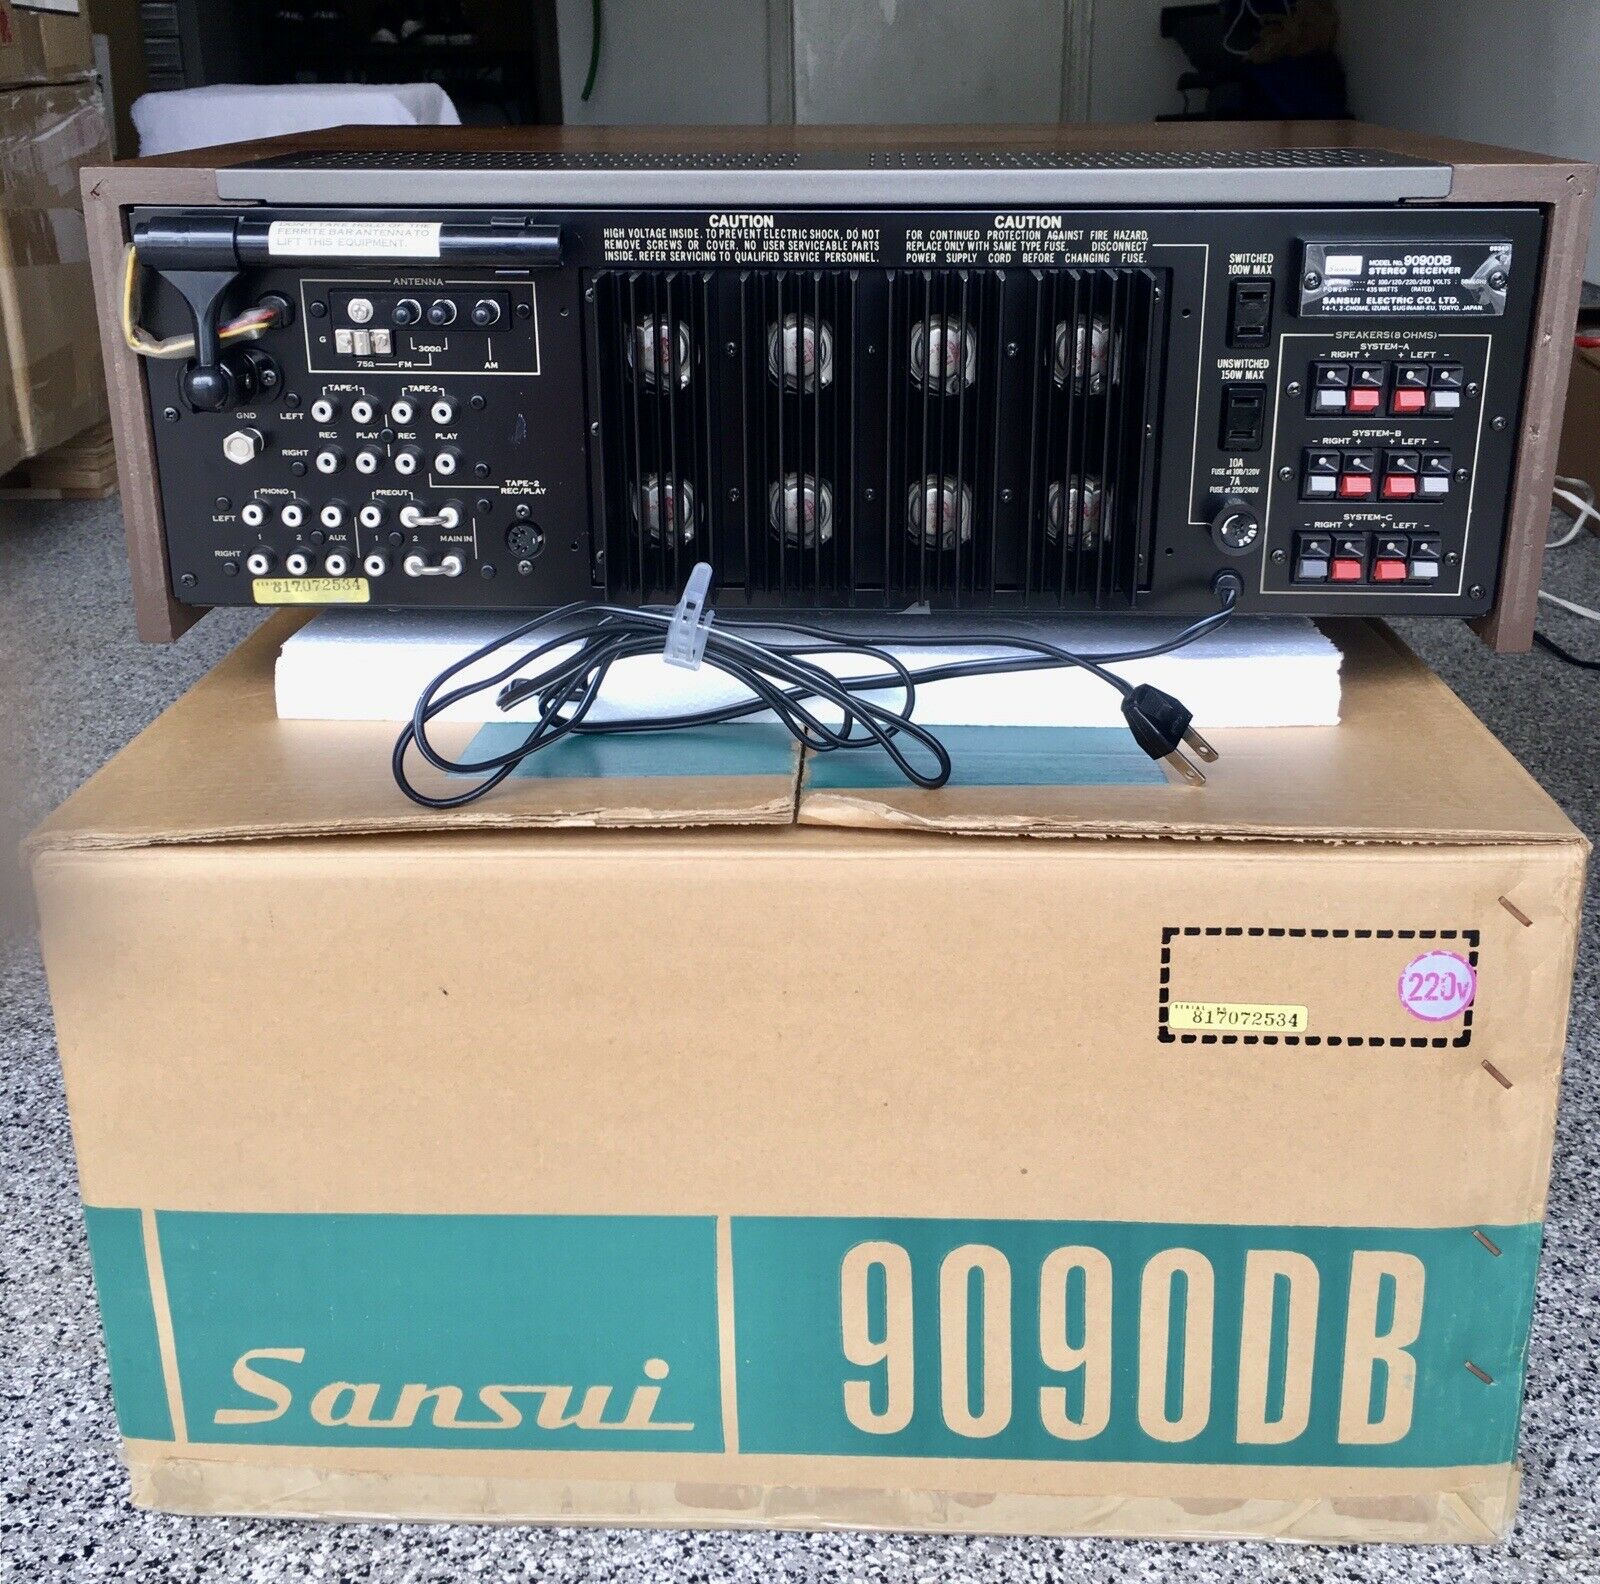 Sansui 9090db Stereo Receiver - New In Box.